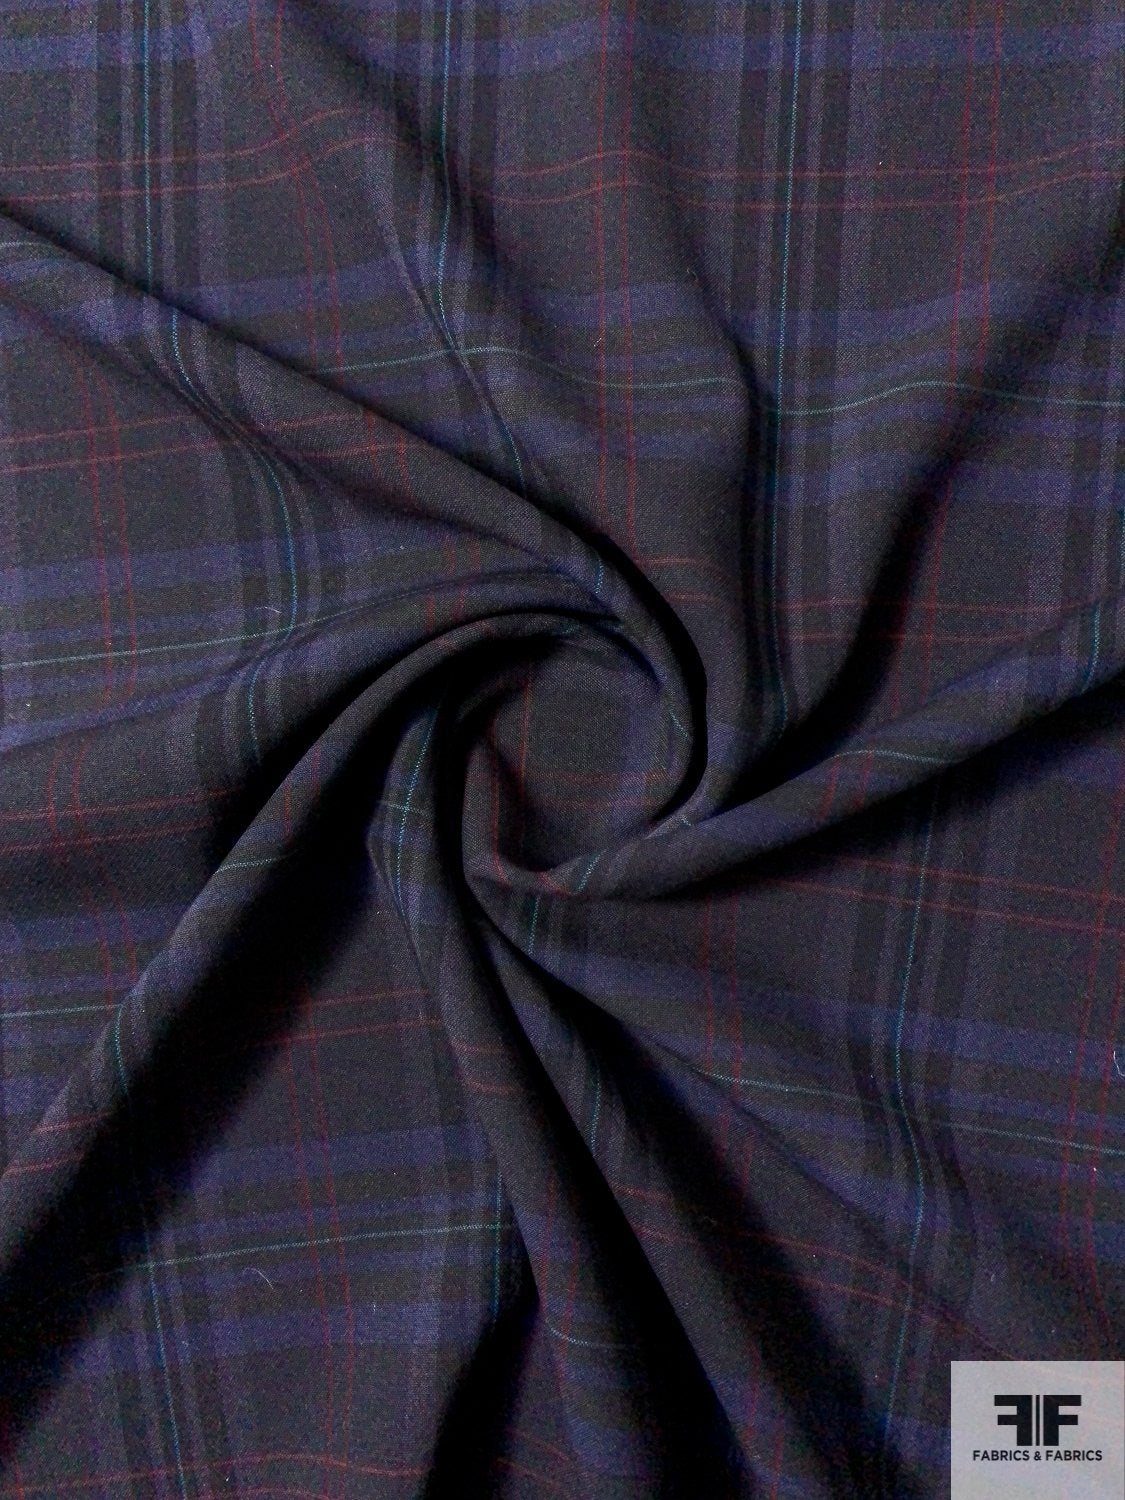 Italian Double-Sided Plaid and Solid Suiting - Black / Navy / Eggplant / Maroon